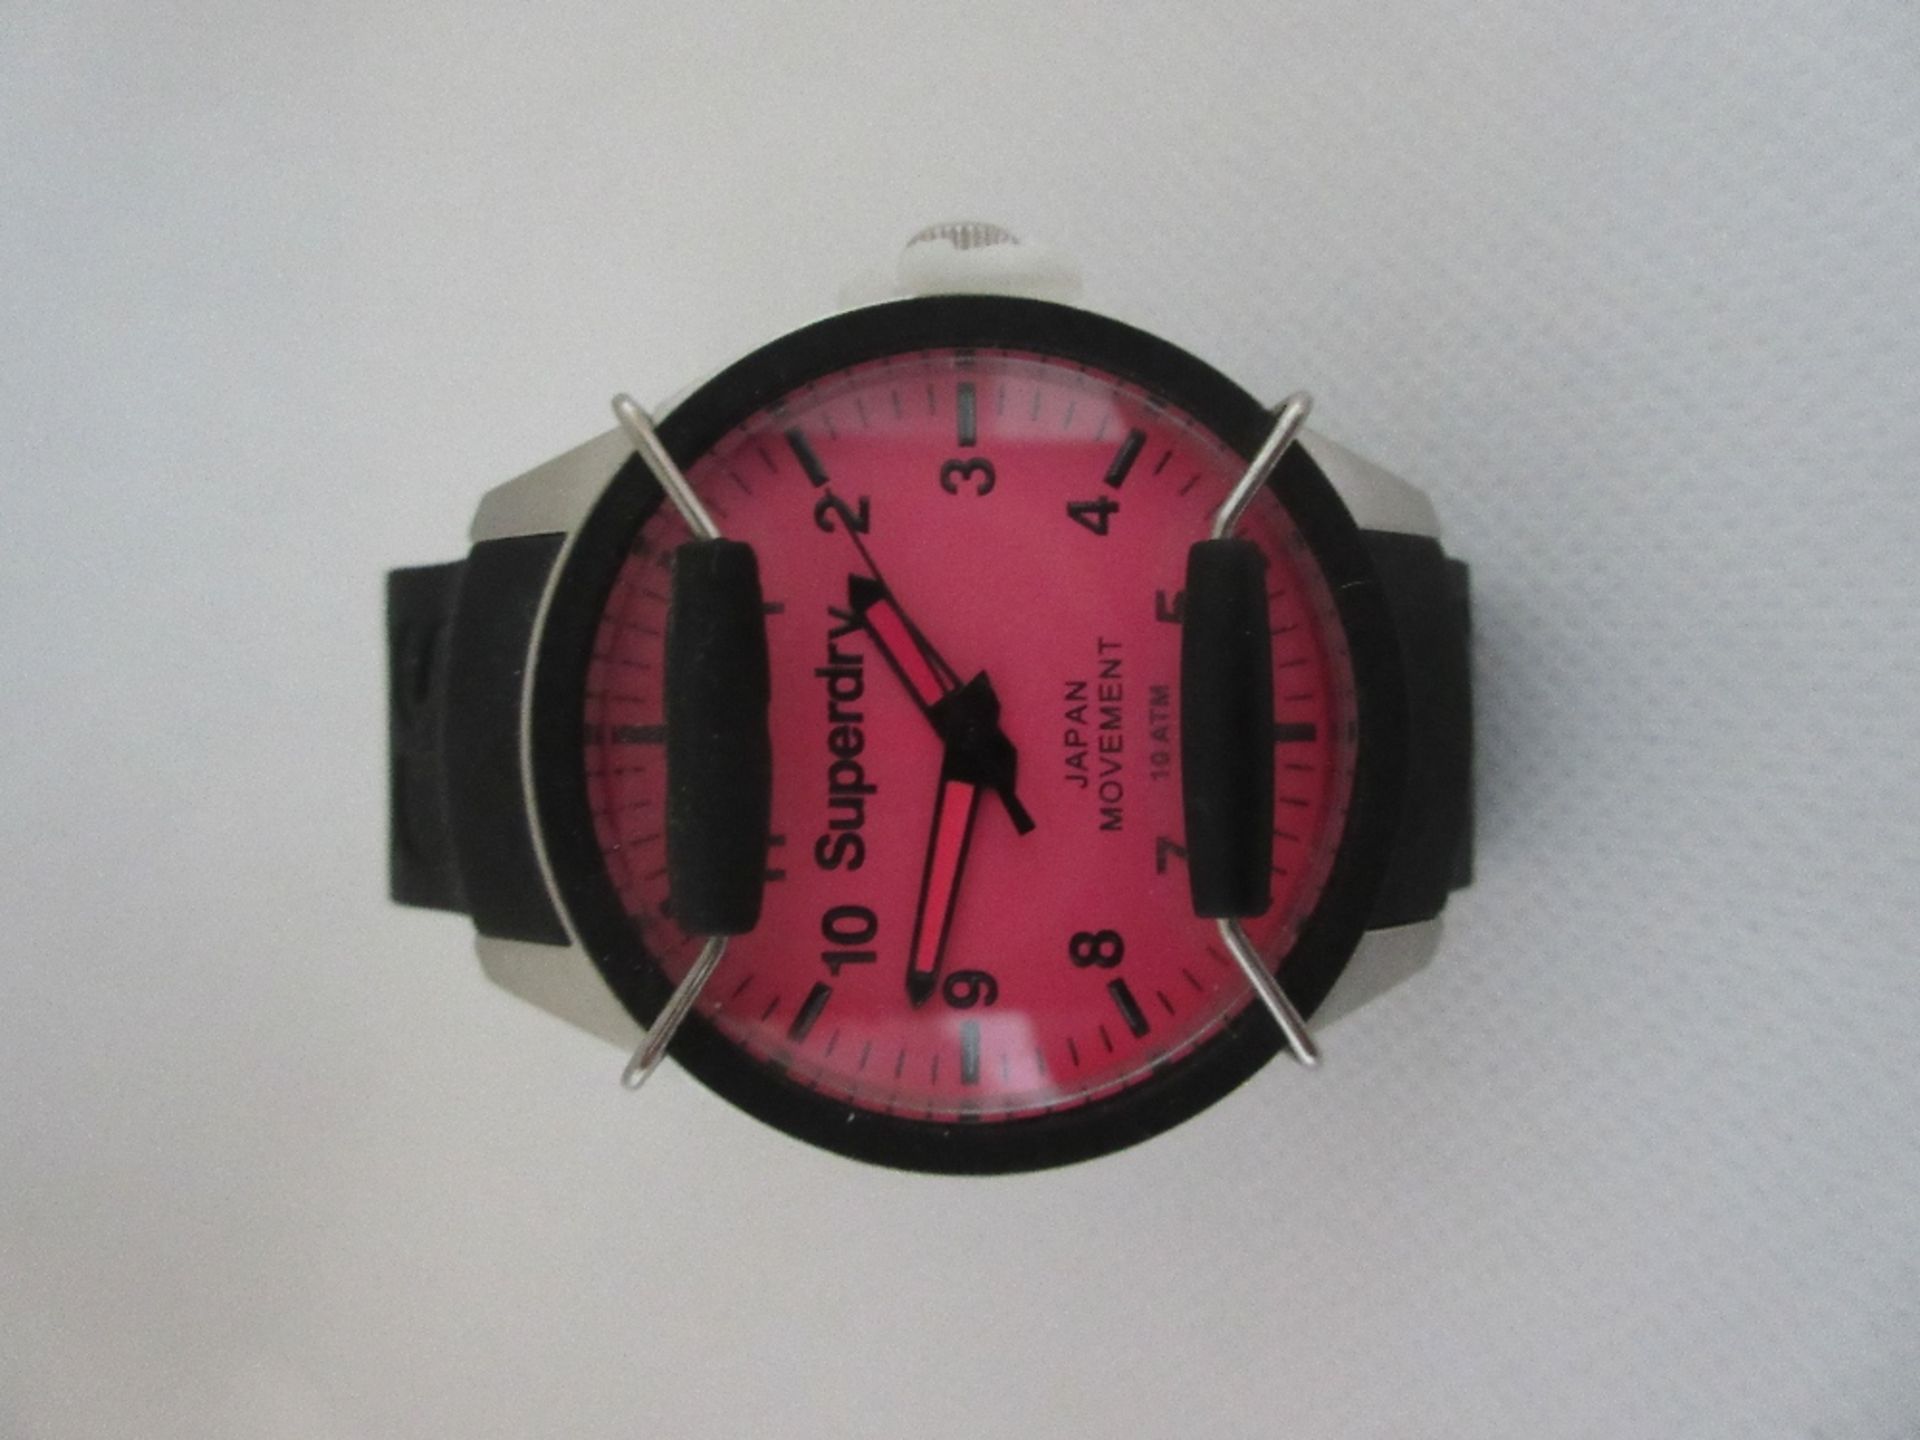 SUPERDRY FEMALE WATCH, MODEL SYL126P, CASE DIAMETER 39MM, RUBBER STRAP, BOXED, RRP £ 59.99 - Image 2 of 4